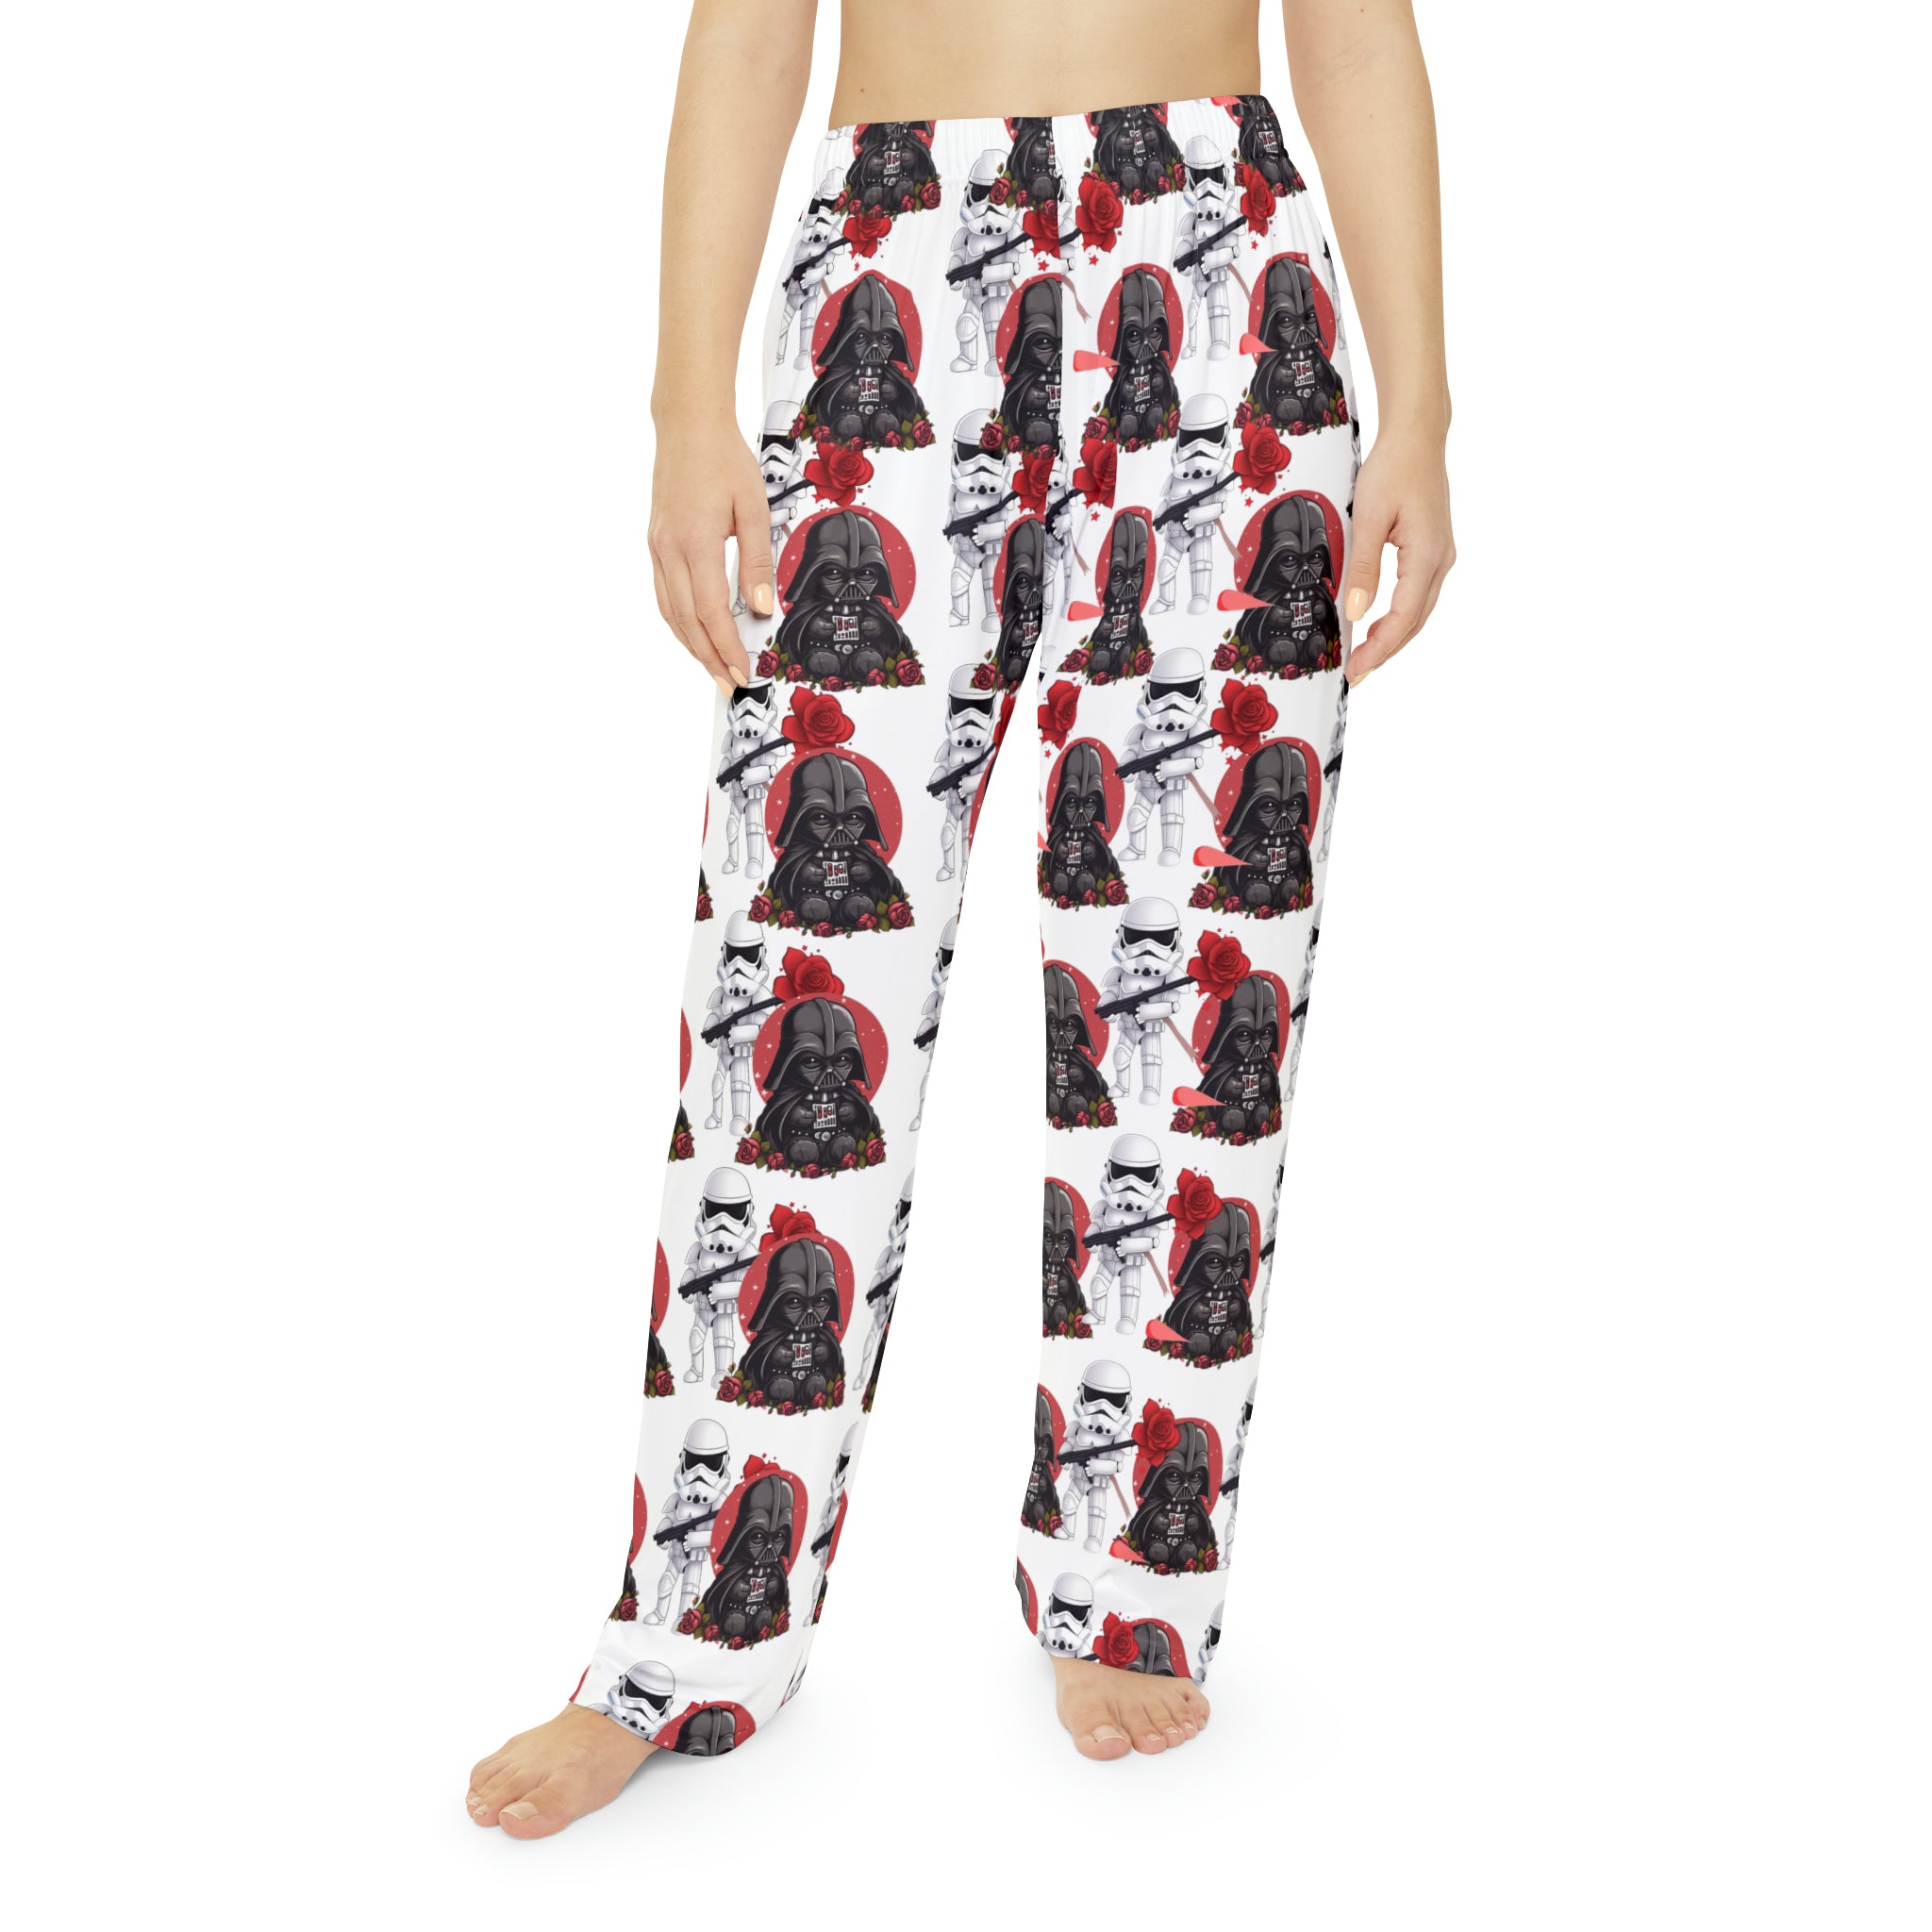 Add this to Your Original Trilogy Theme. Be Unique and Original. Trendy and Comfy Popular Iconic Galaxy Empire Women's Pajama Pants (AOP) - Perfect Loungewear Perfect for Watching Prequels or Trilogies